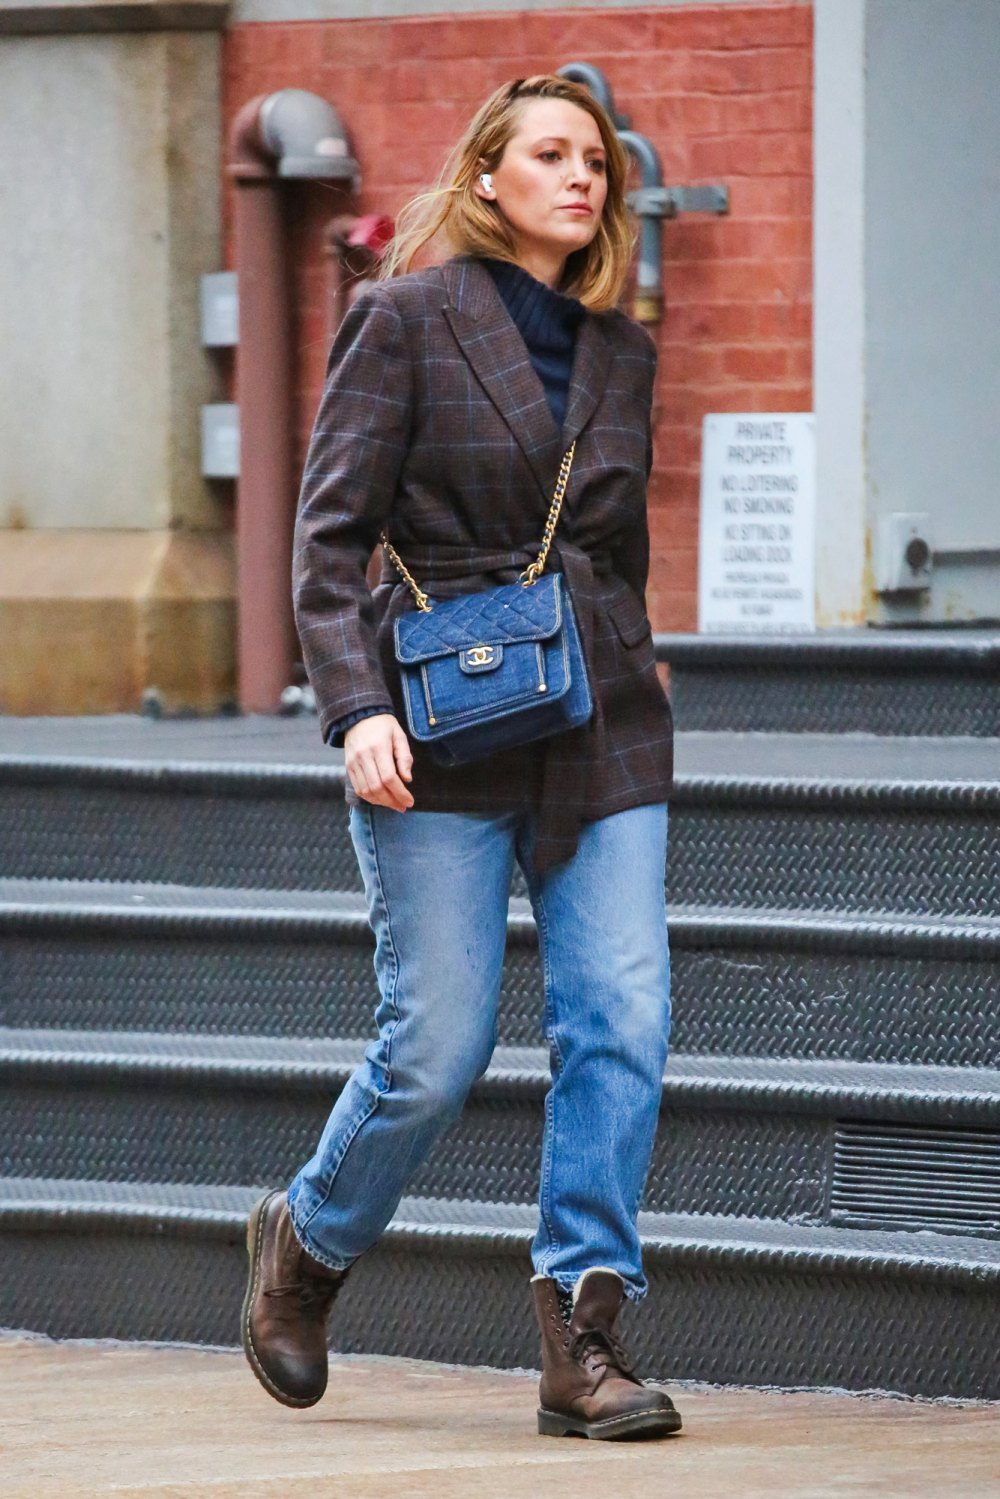 Blake Lively Is Sophisticated and Relaxed in Fall Outfit